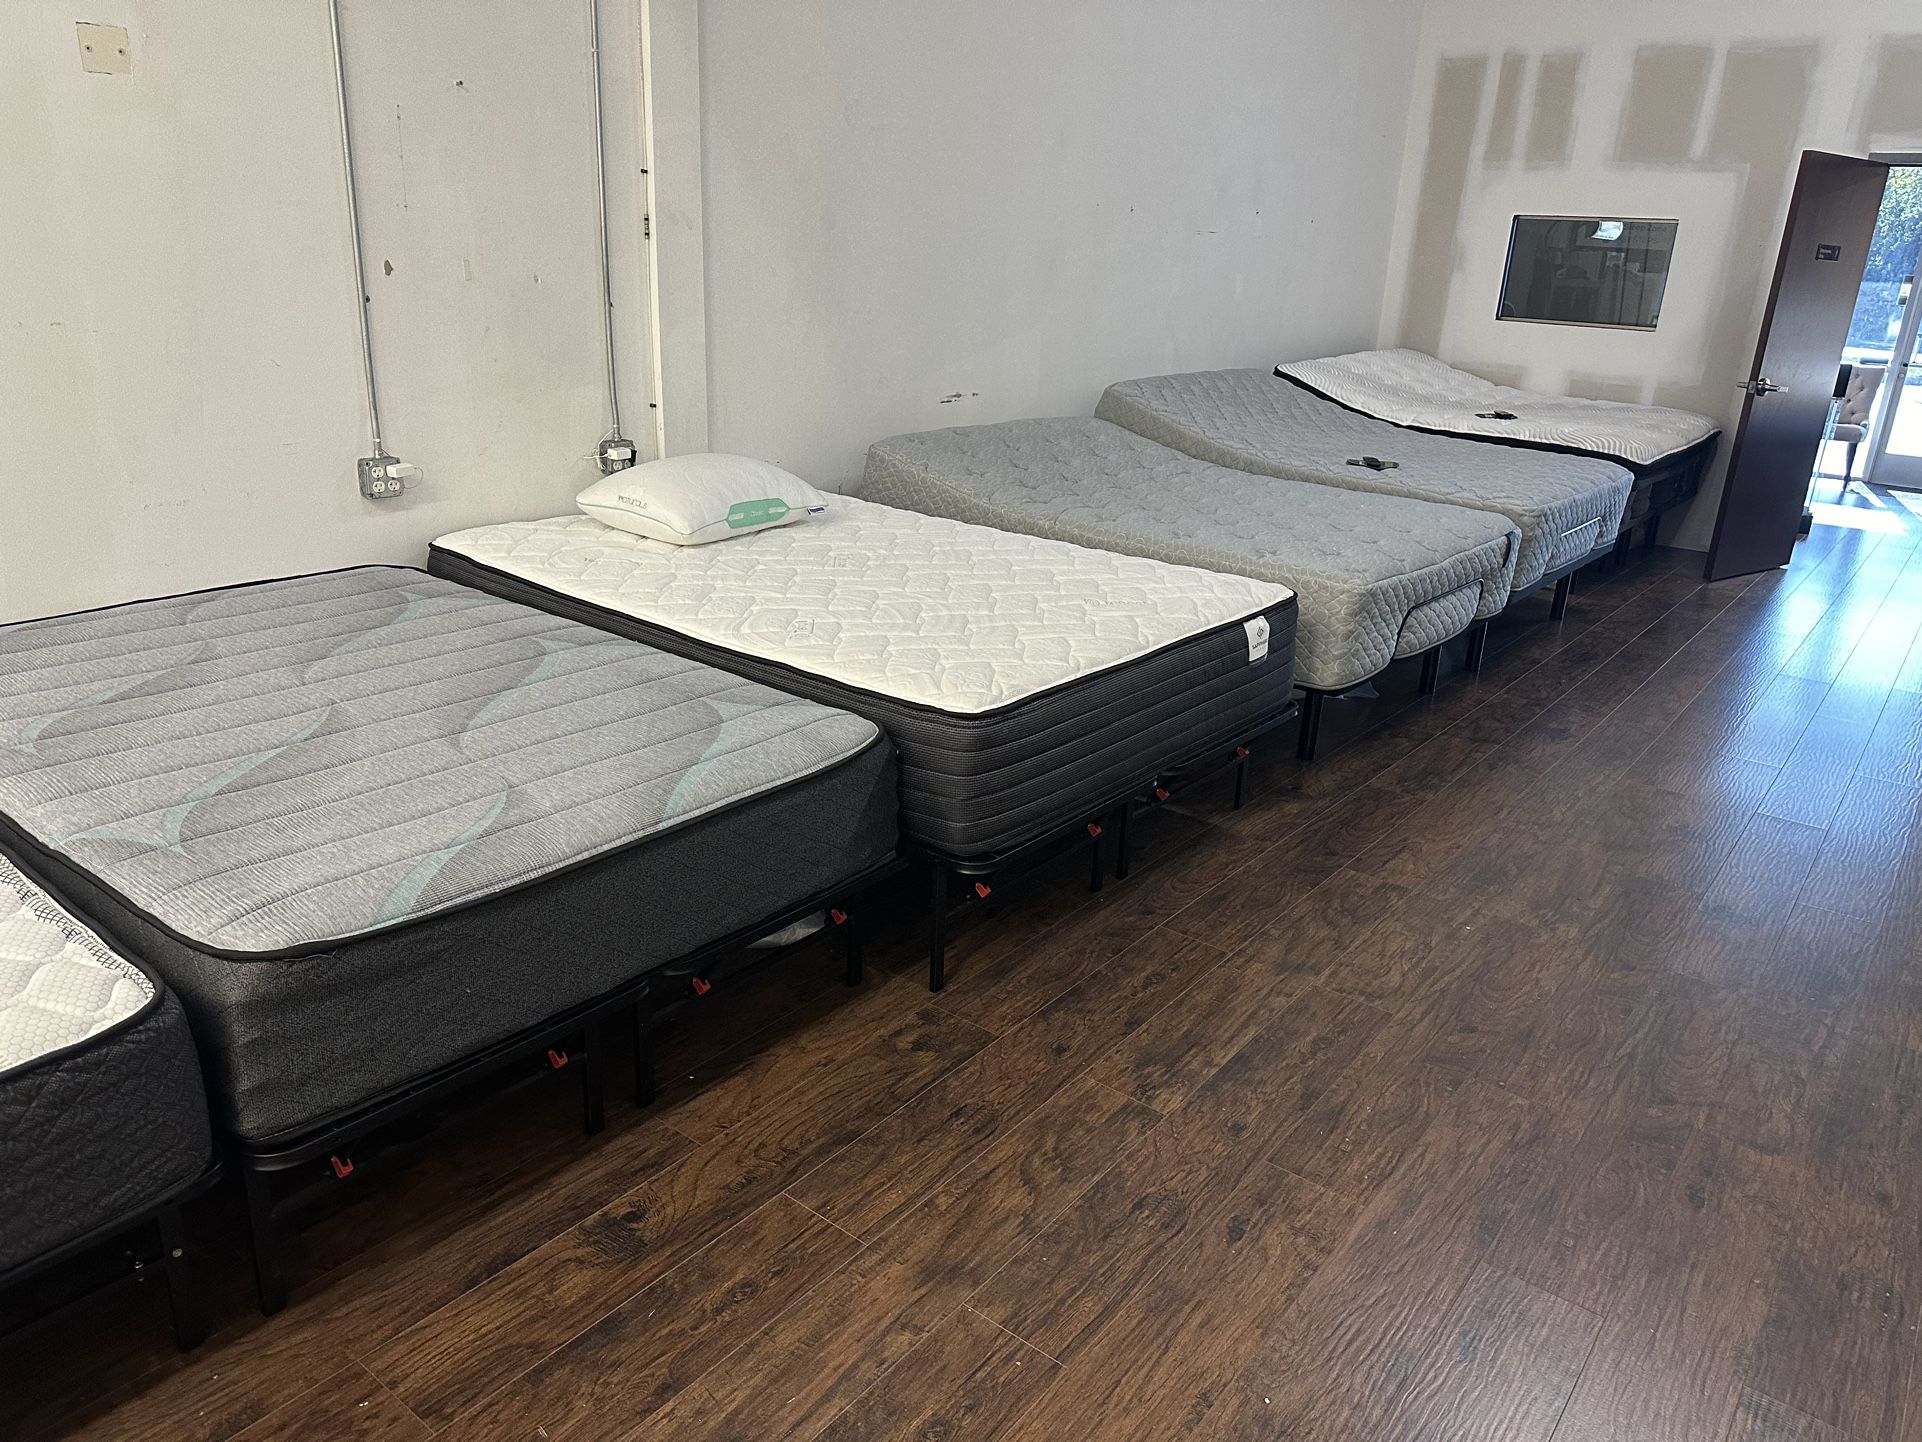 Take home a mattress today for just $20 While Supplies Last